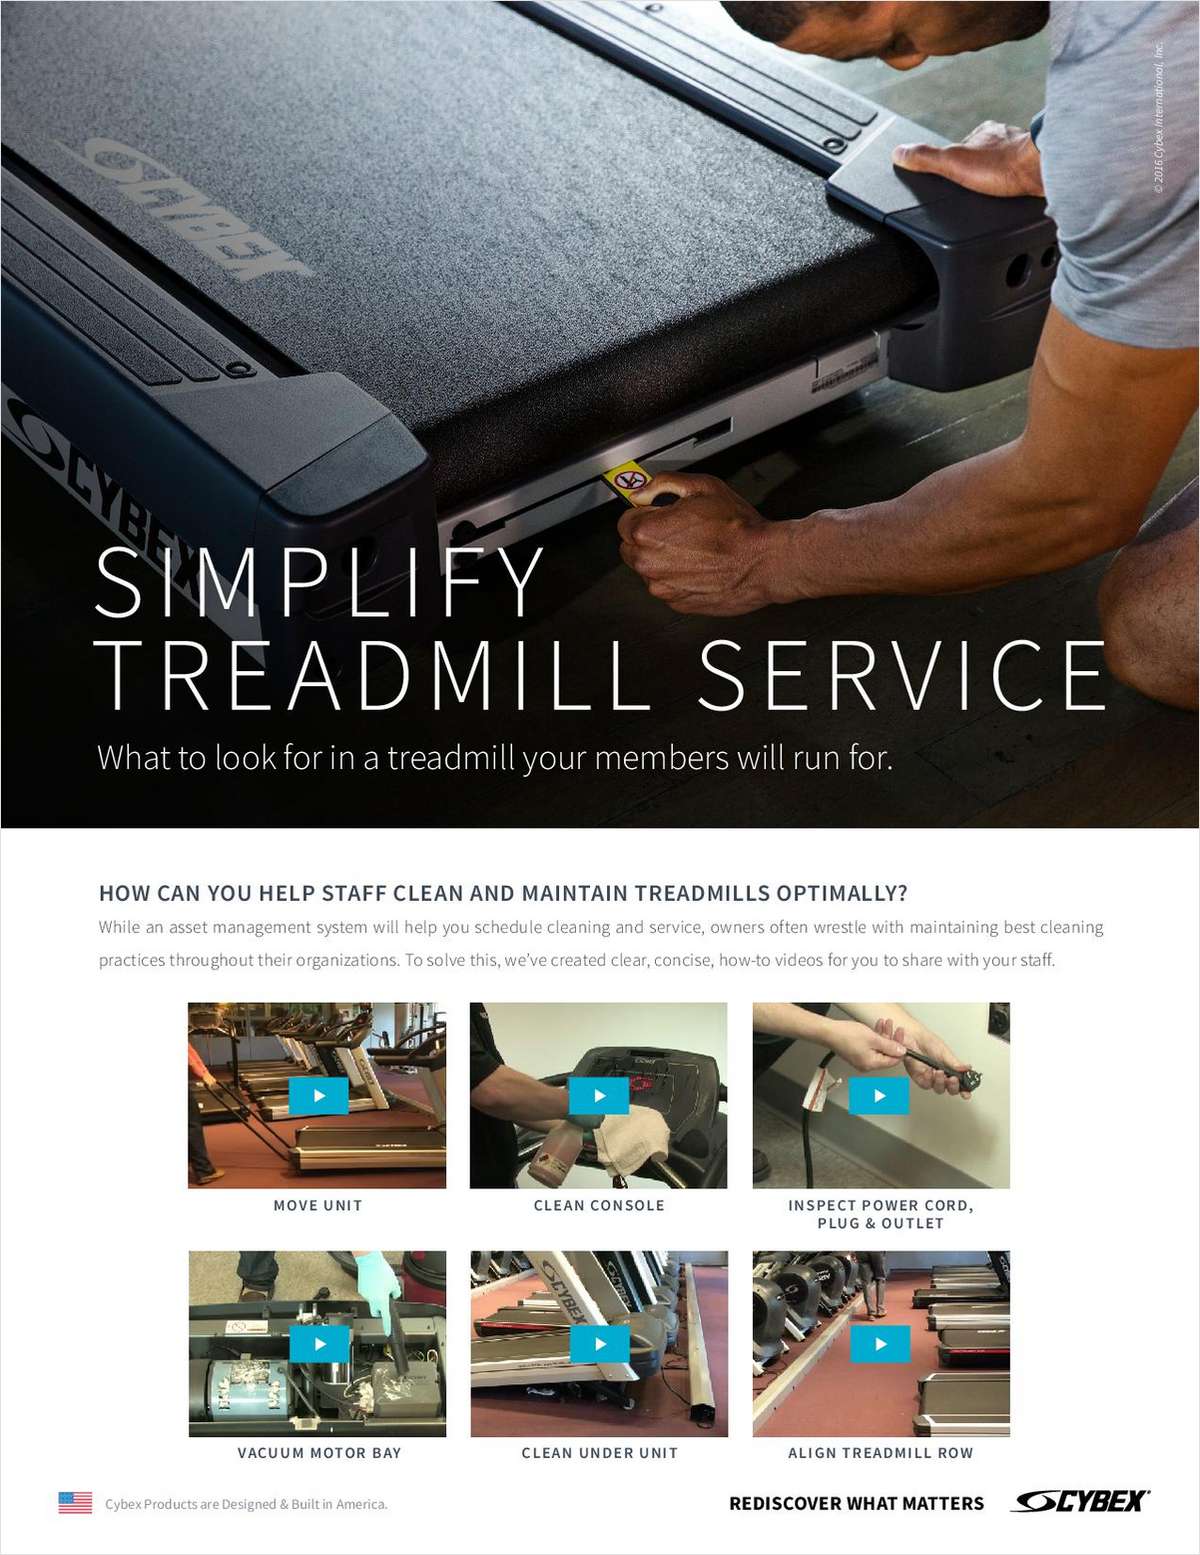 Simplify Your Treadmill Service in 6 Easy Steps